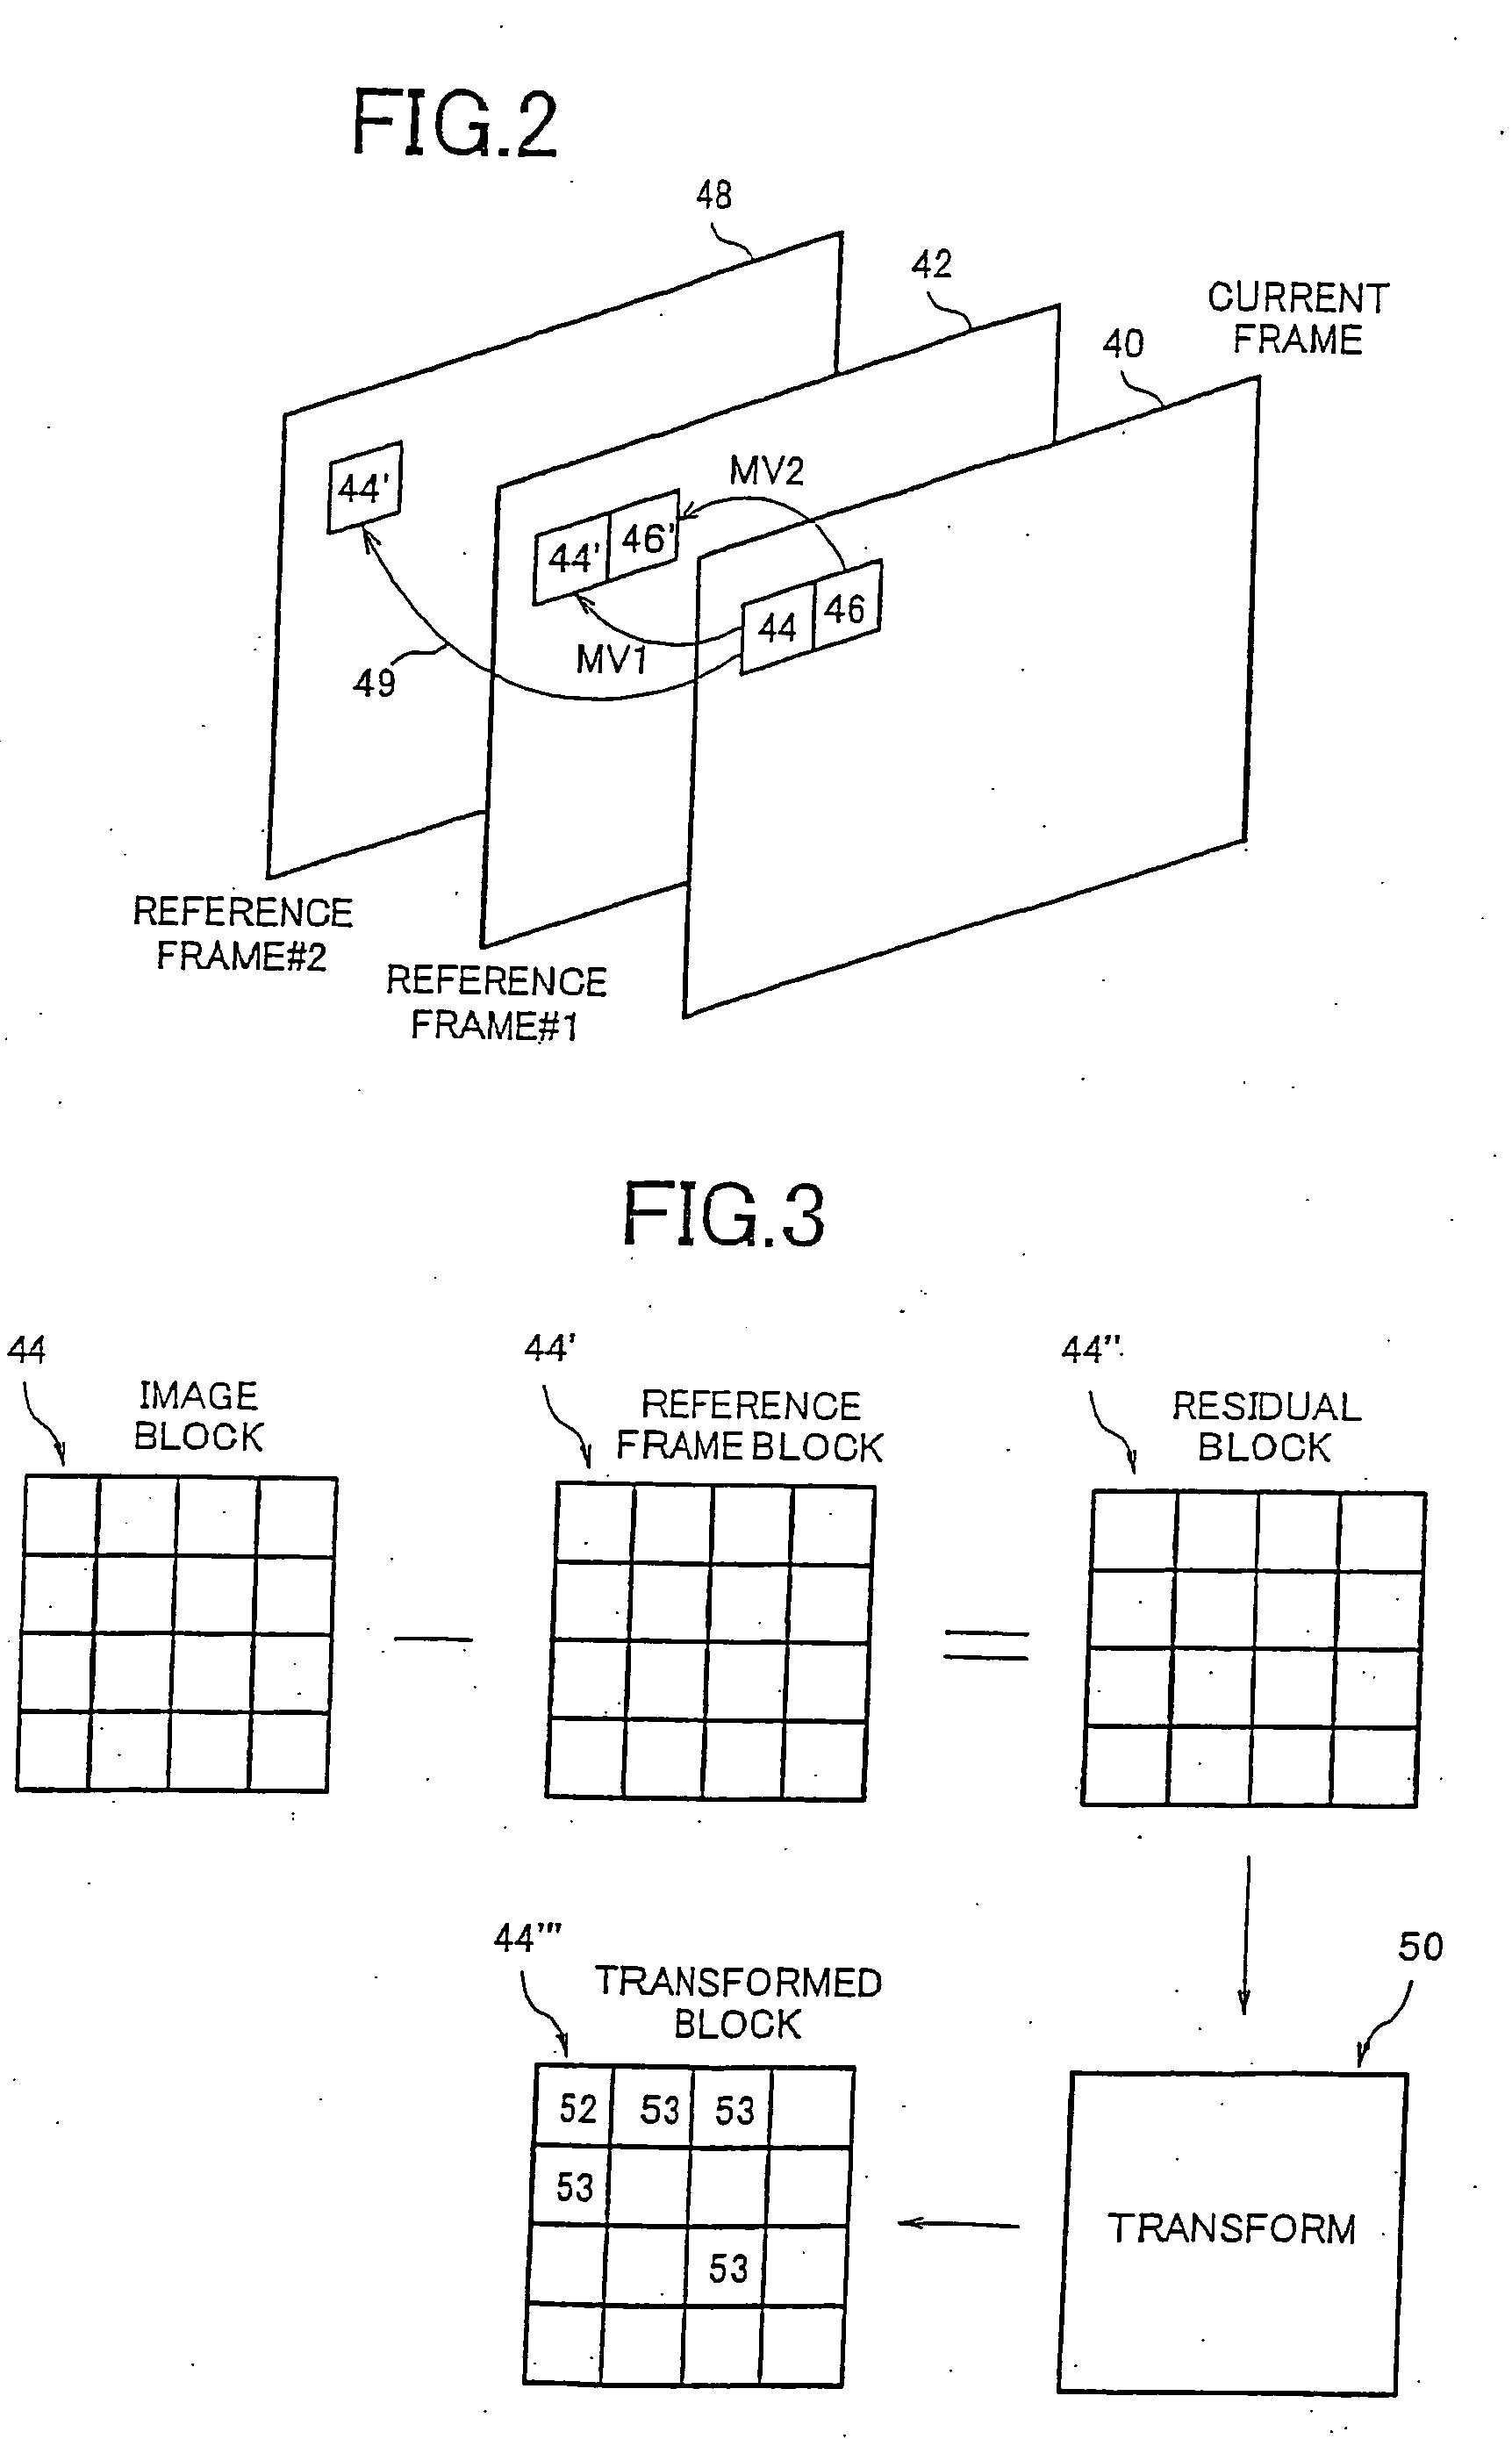 Adaptive filtering based upon boundary strength